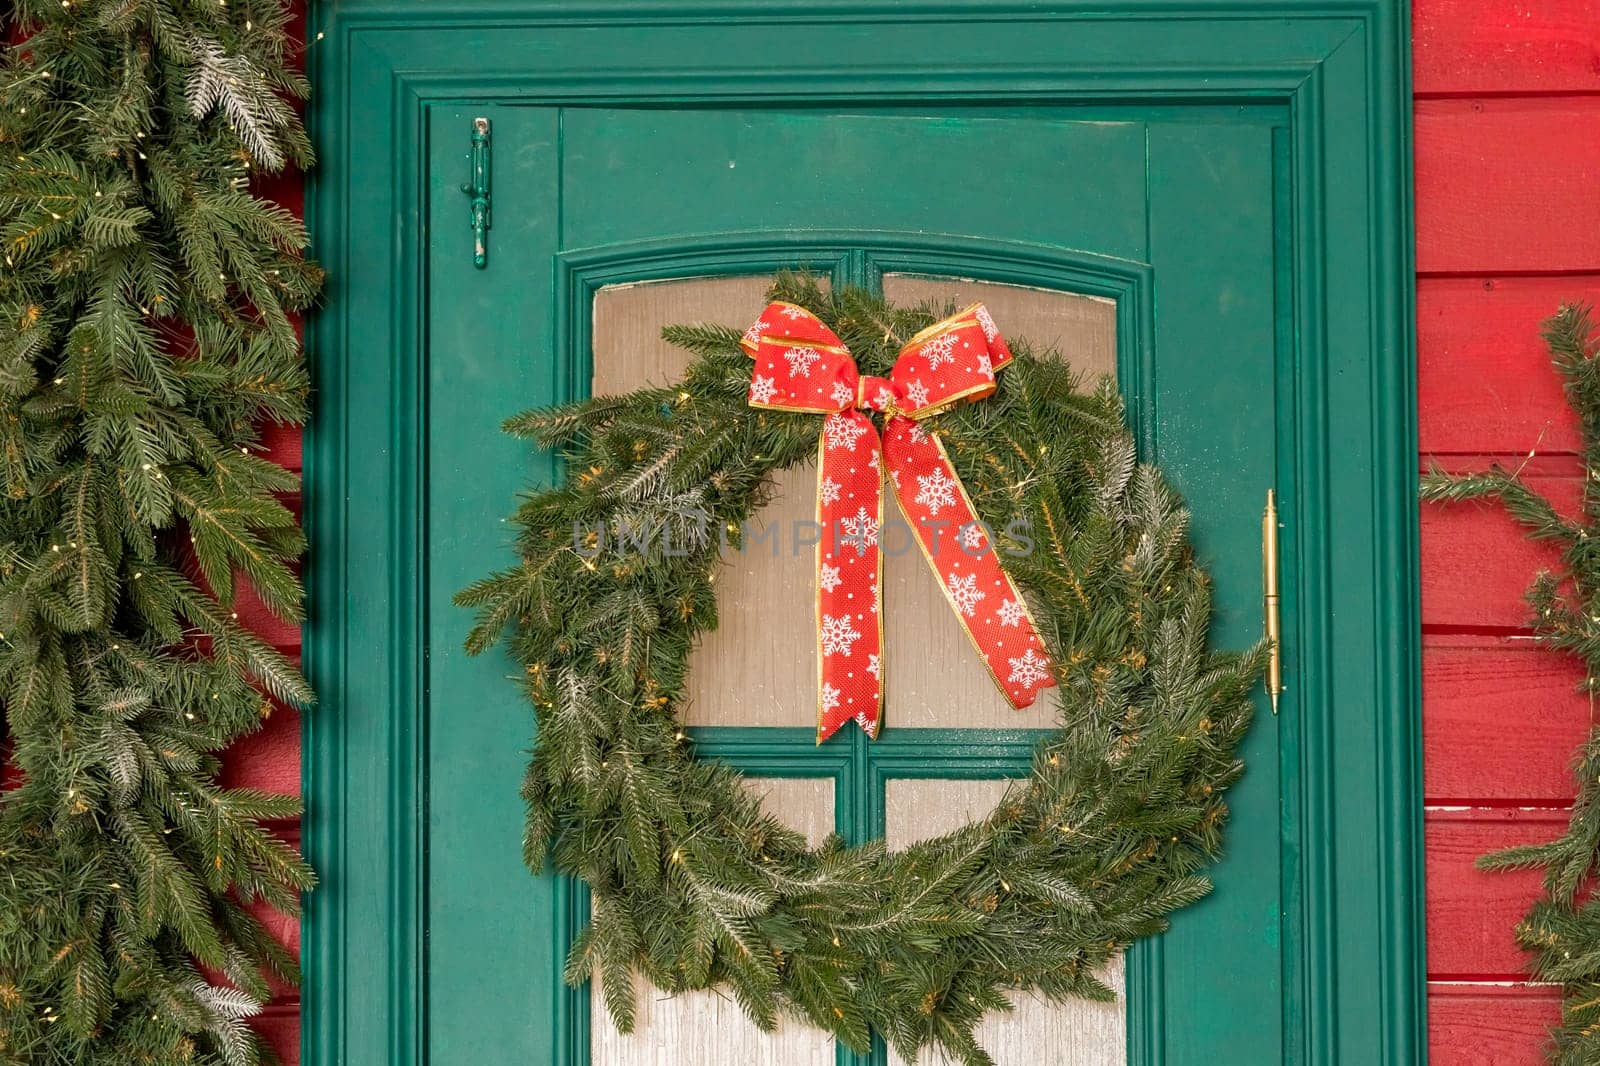 Wreath decoration at door for Christmas holiday